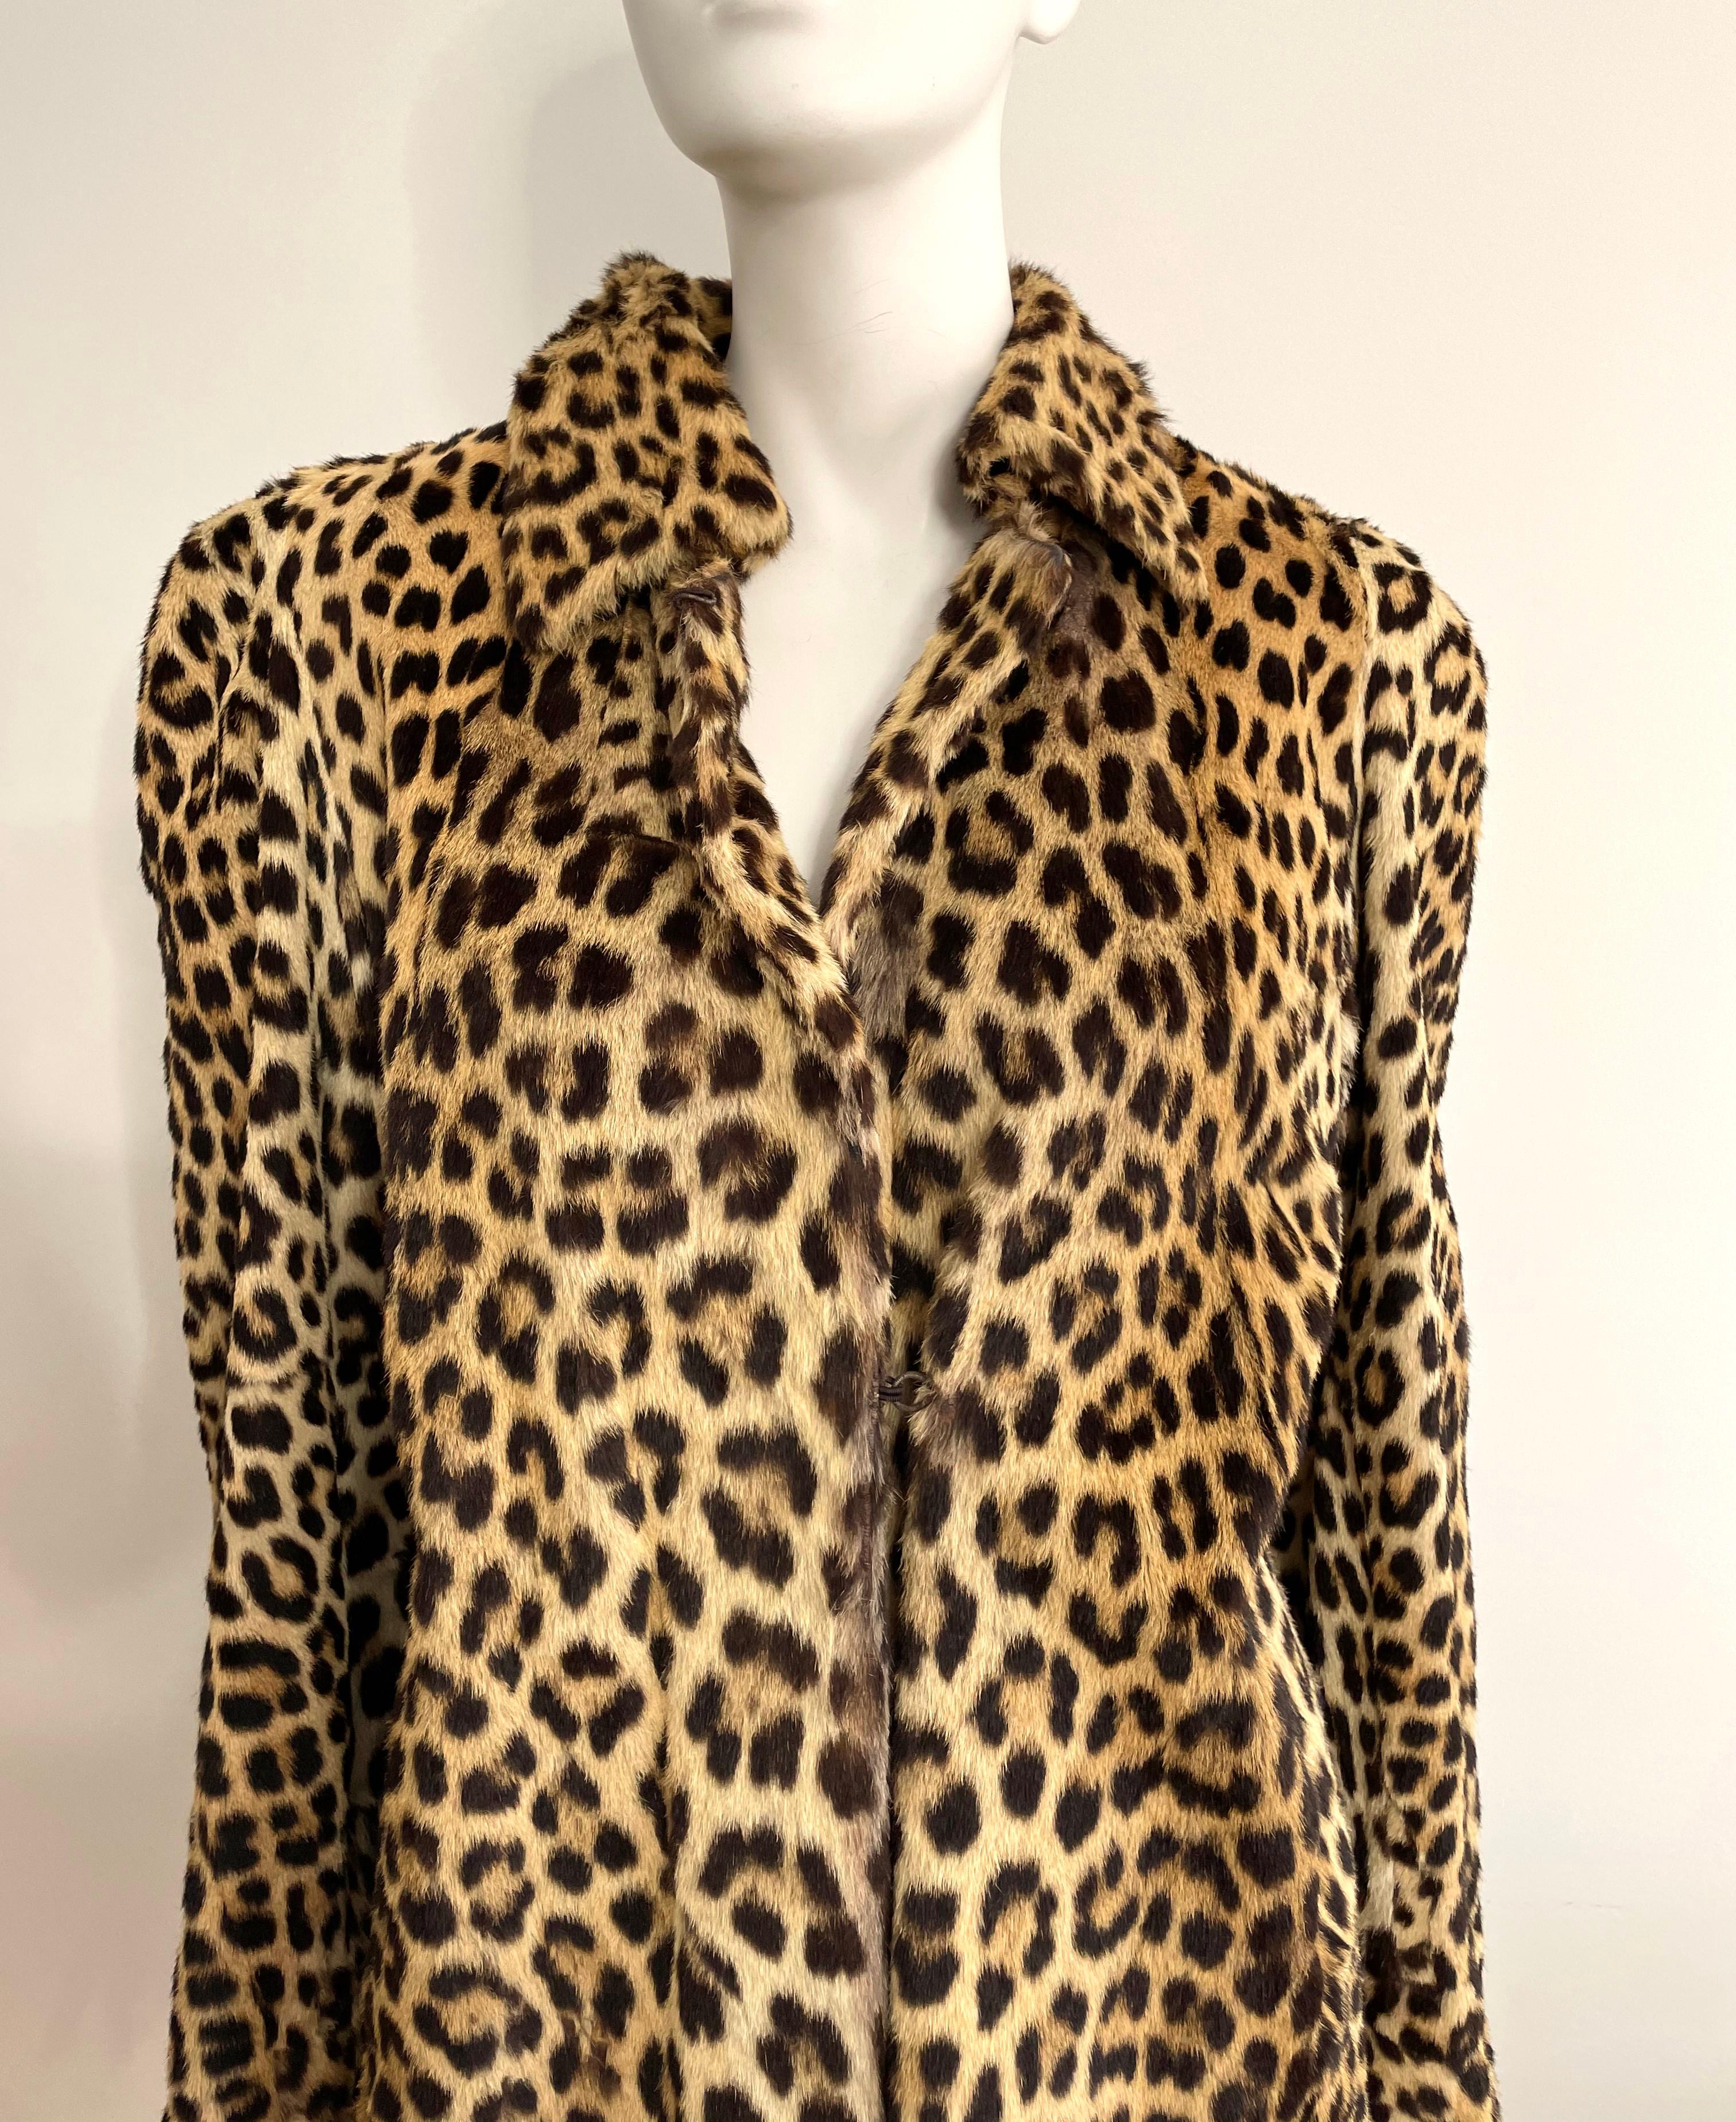 Stunning Sheared Fur with a leopard print. Lining in wonderful condition. The best fit is 6-8. Please compare our measurements with a piece of clothing that fits you. Please be sure to check our storefront for more fashion as we have both Vintage